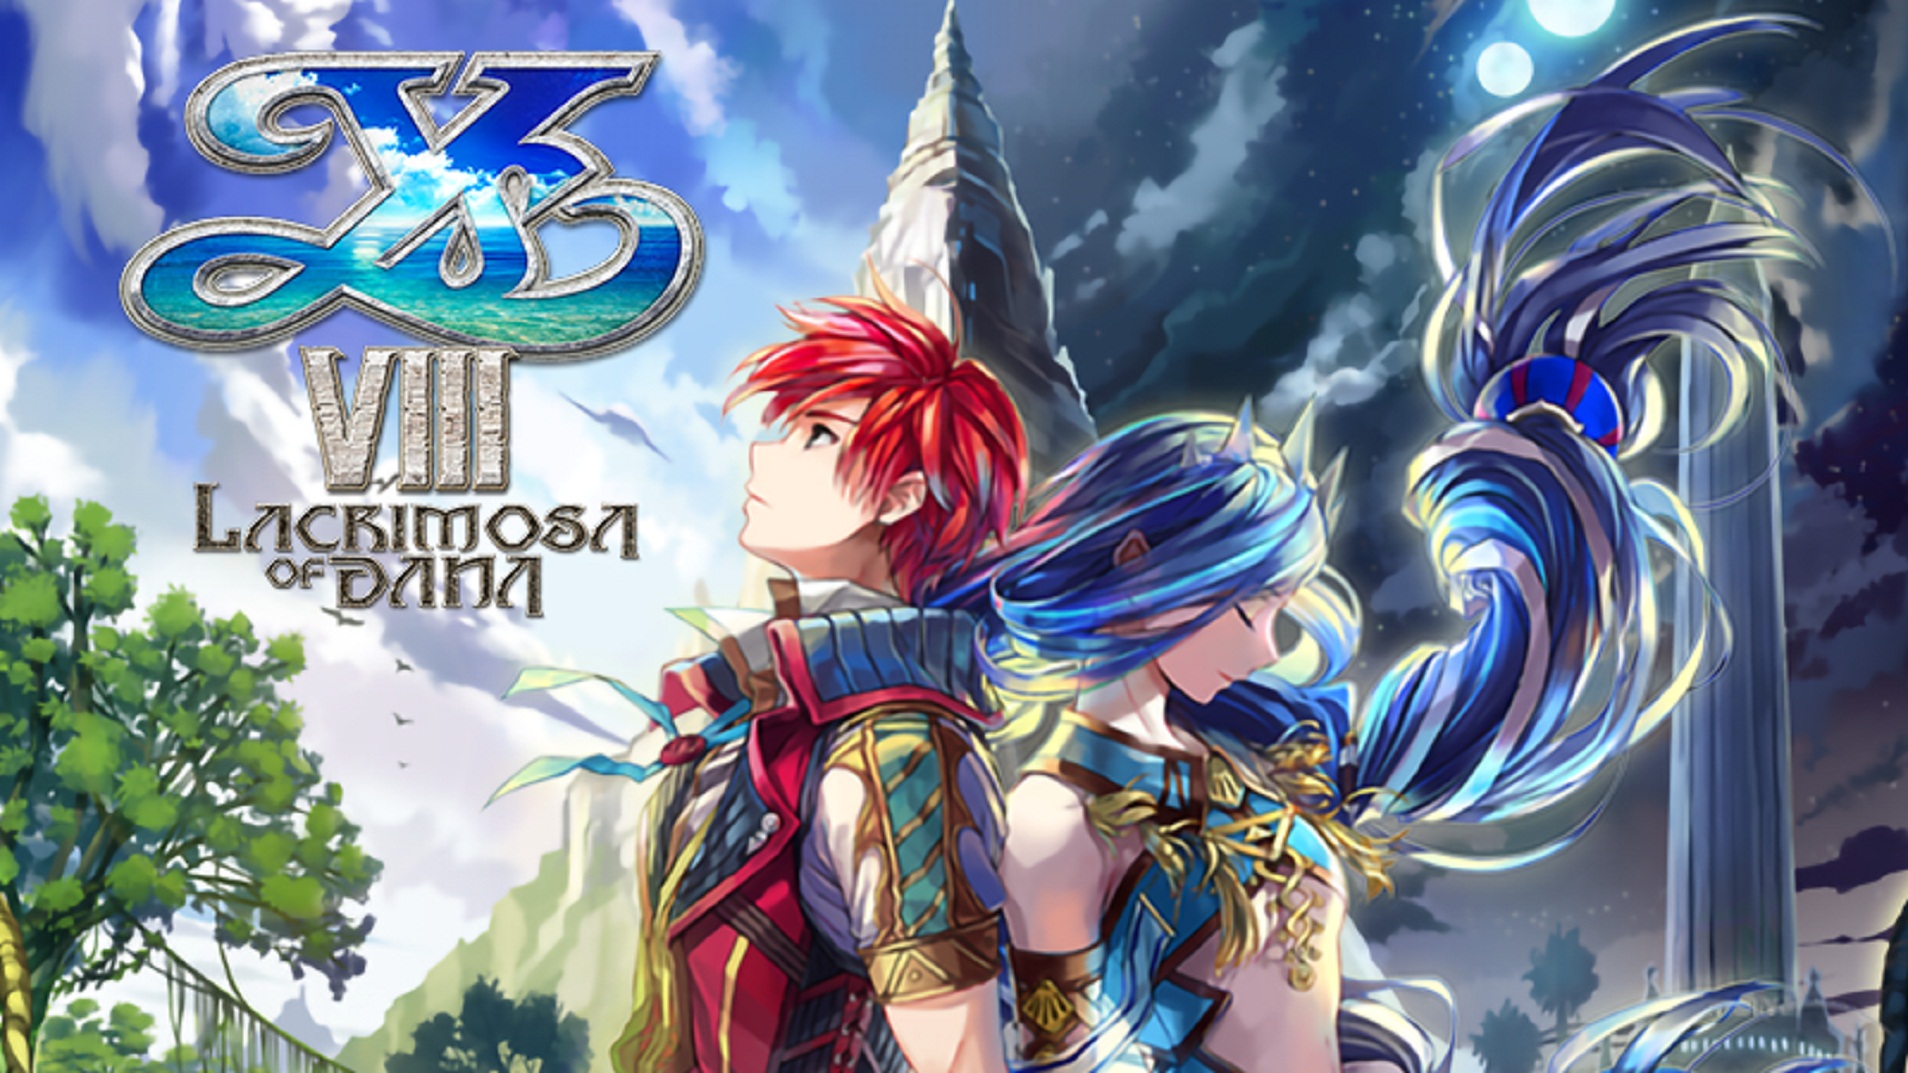 Nihon Falcom’s, Ys VII: Lacrimosa Of Dana Got A Major Update To Mainly Improve The Visuals And Also A New Co-op Mode